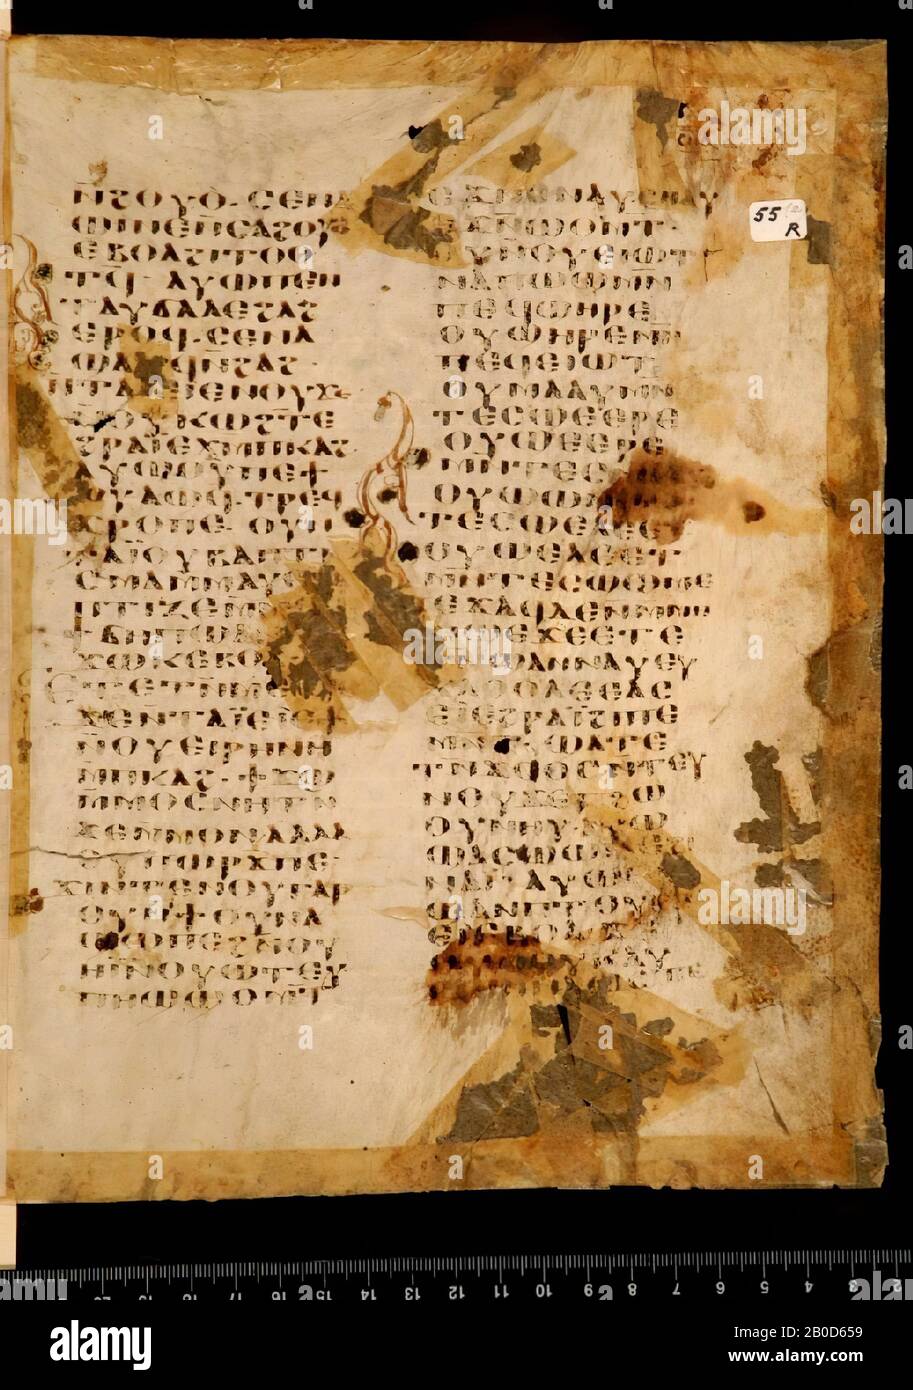 bible text, Luke, uncial, 2 column, 9-30 lines, A: Mode of framing: codex of 3 sheets (first two only fragmentary), in cardboard cover, B: Format :, 1. Number of sheets : 3, Page 1: 2 columns (I: 21 lines, II: 9 lines), Page 2: 2 columns (I: 9 lines, II: 20 lines), Page 3: 2 columns (I: 20 lines, II: 9 lines), page 4: 2 columns (I: 9 lines, II: 20 lines), page 5: 2 columns (I: 30 lines, II: 30 lines), page 6: 2 columns (I: 30 lines, II : 30 lines), 2. Scripture: Coptic, 3. Color: black, 4. Reading direction: L&gt; R, 5. Number of vignettes: none, 6. Color vignettes: N / A, C: Description Stock Photo